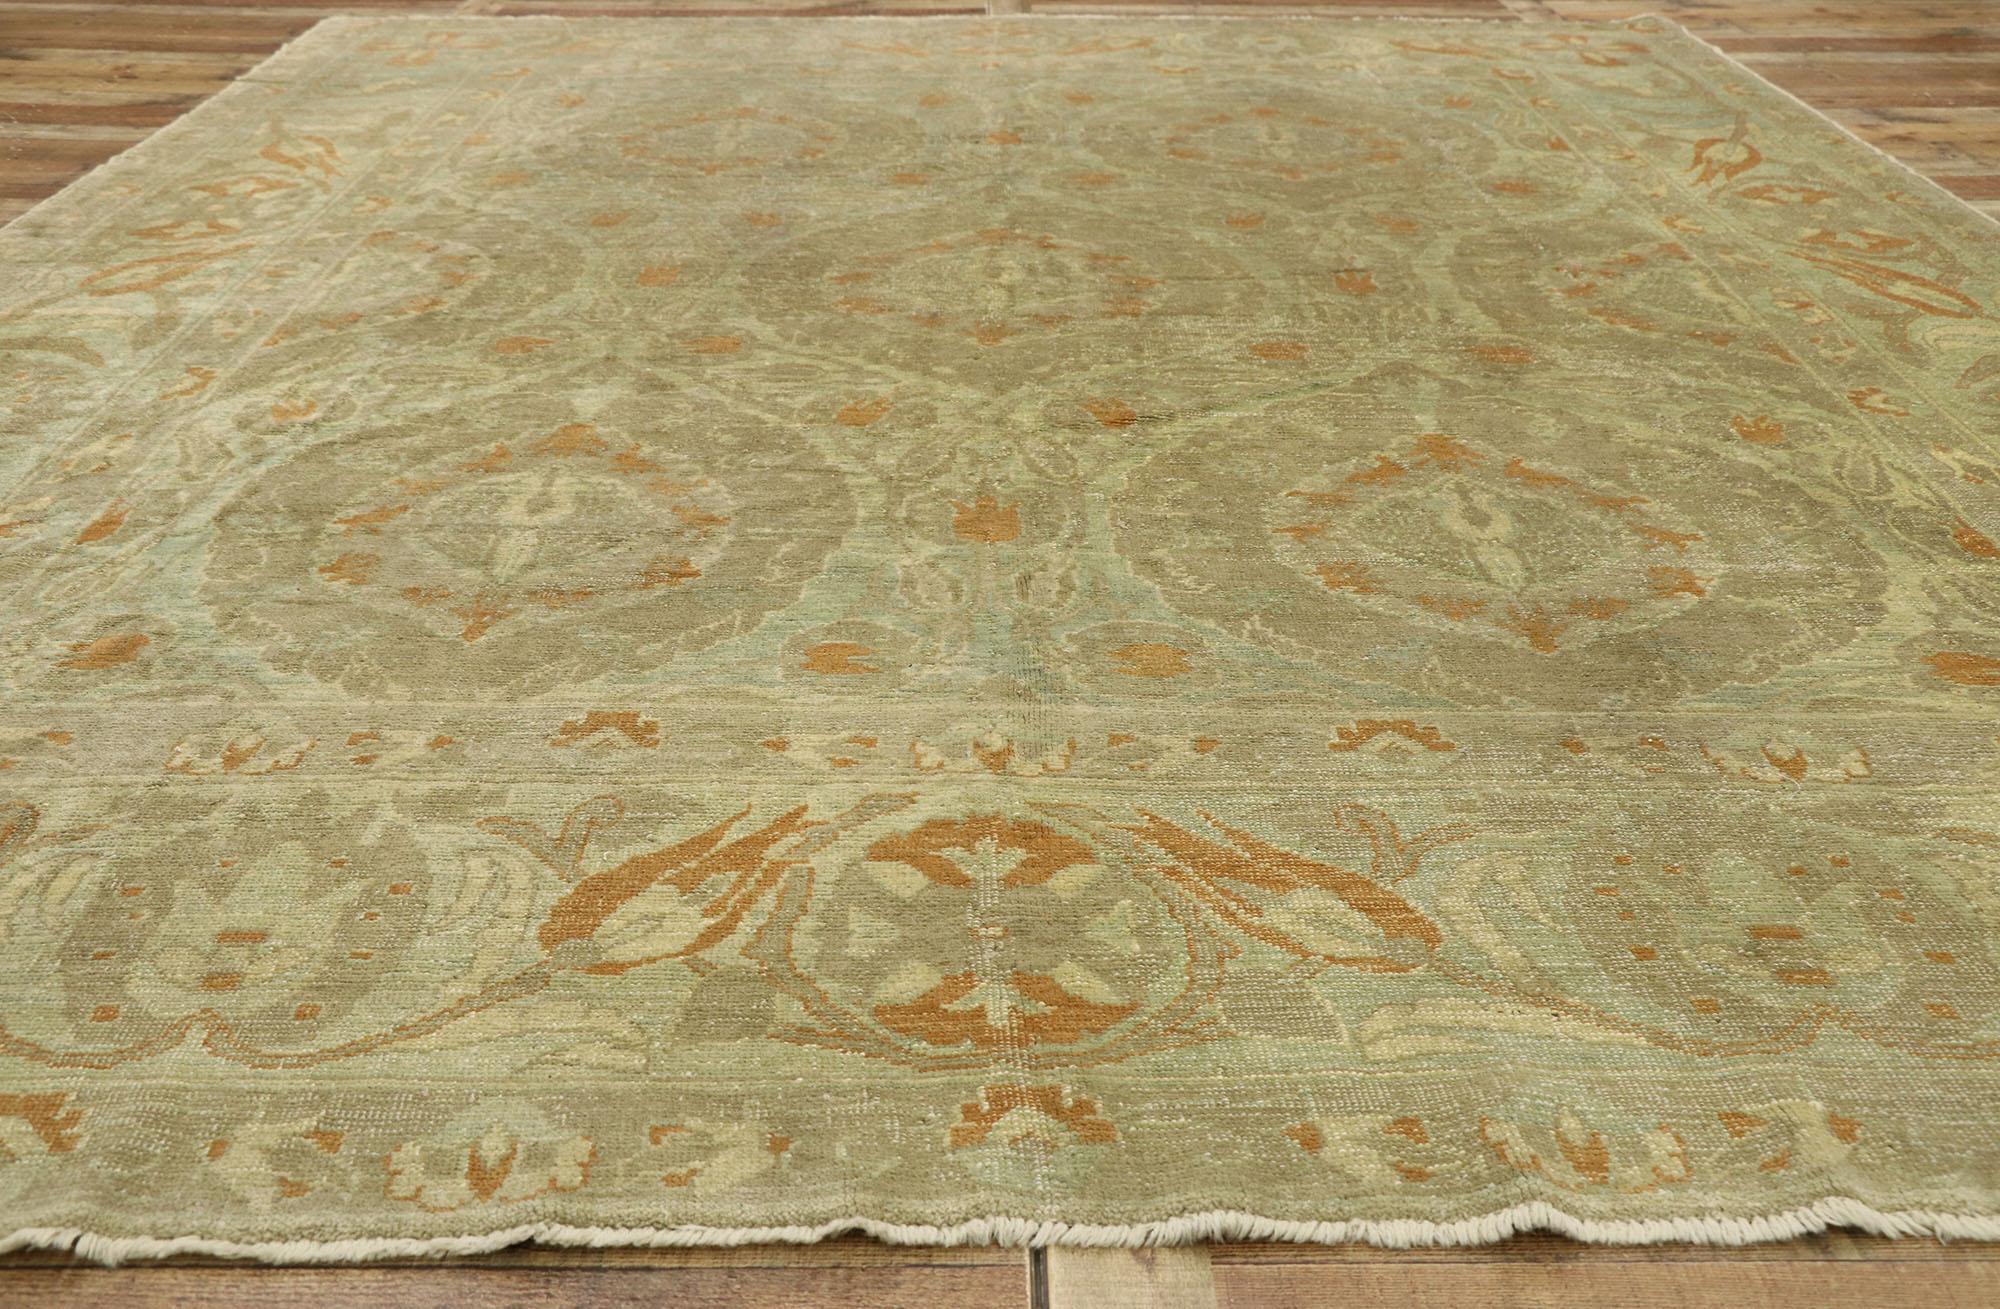 New Turkish Oushak Rug with Arts & Crafts Style Inspired by William Morris For Sale 1